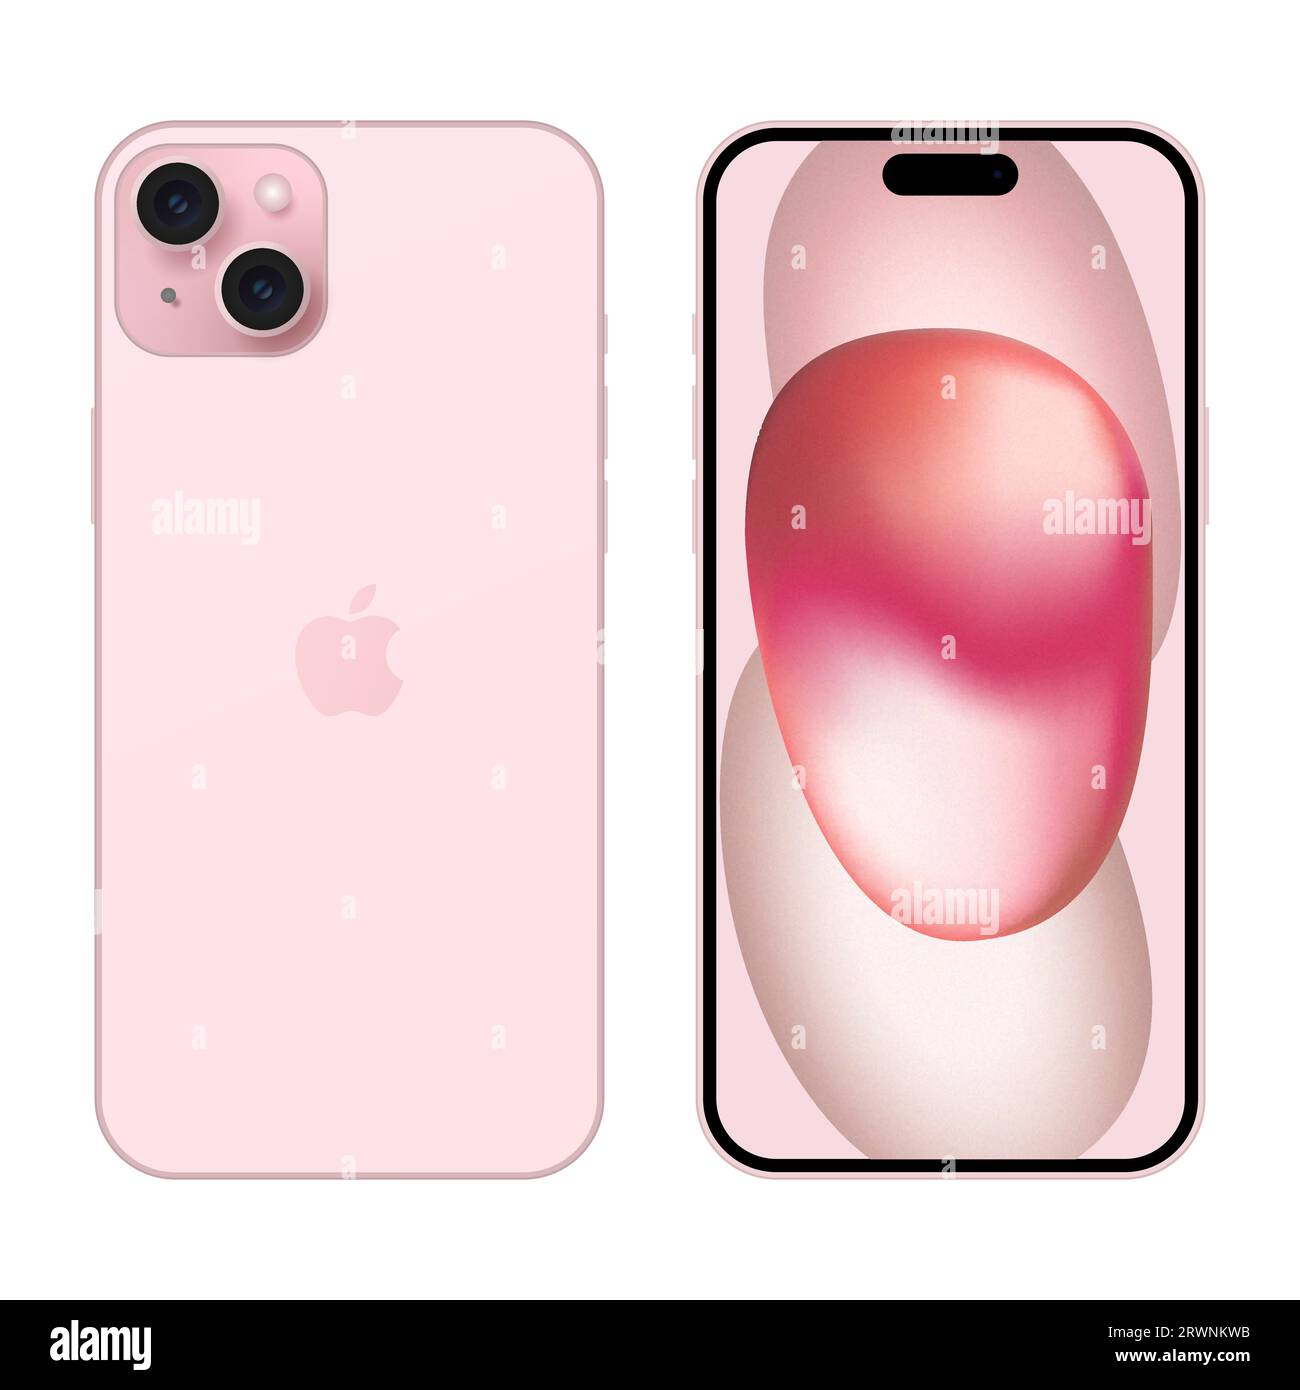 https://c8.alamy.com/comp/2RWNKWB/apple-iphone-15-plus-pink-mockup-front-screen-phone-and-back-side-iphone-editorial-vector-isolated-on-white-background-2RWNKWB.jpg